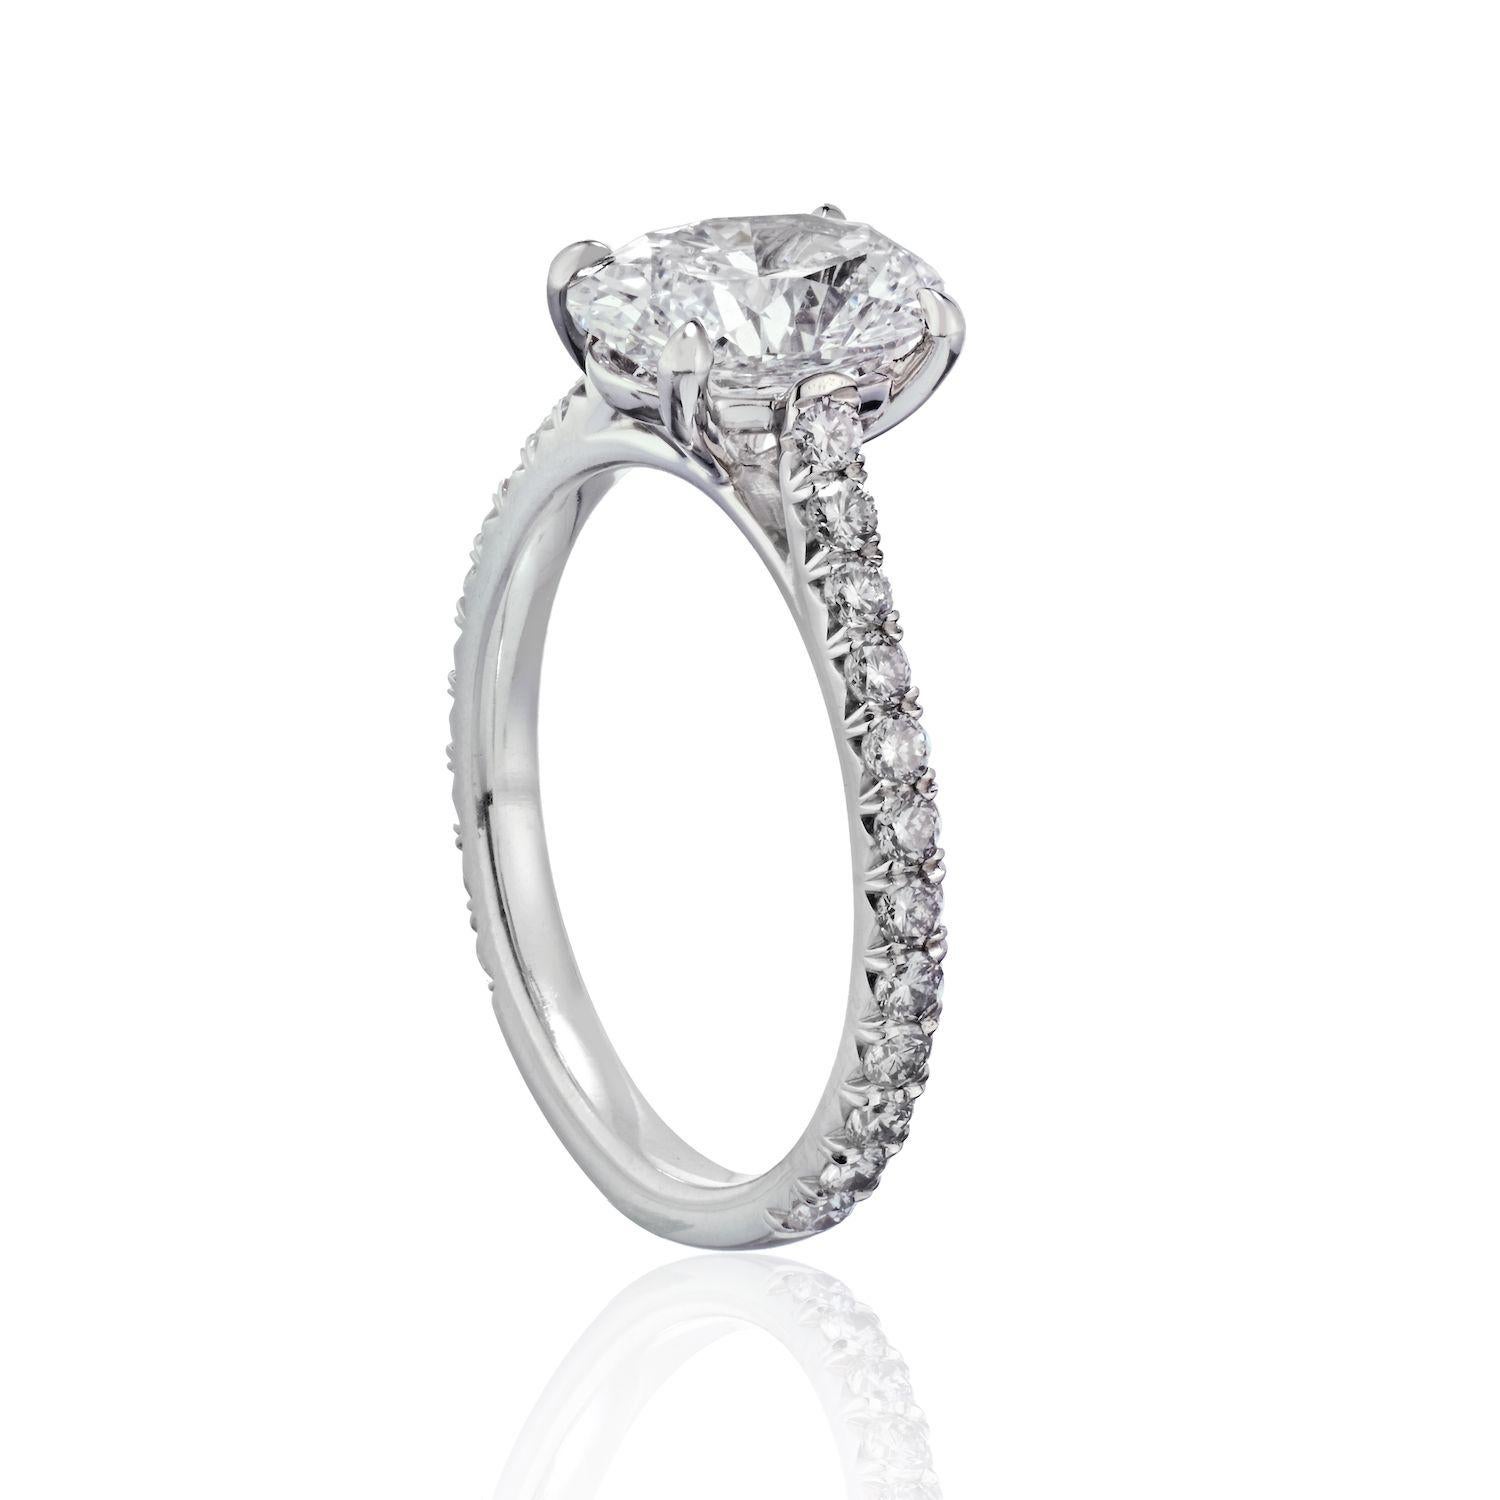 This oval cut diamond solitaire is set in a handmade four prong platinum mounting with diamond pavé band. Our engagement rings are hand-crafted in New York, custom tailored to any desired specification and utilizing GIA certified diamonds. This